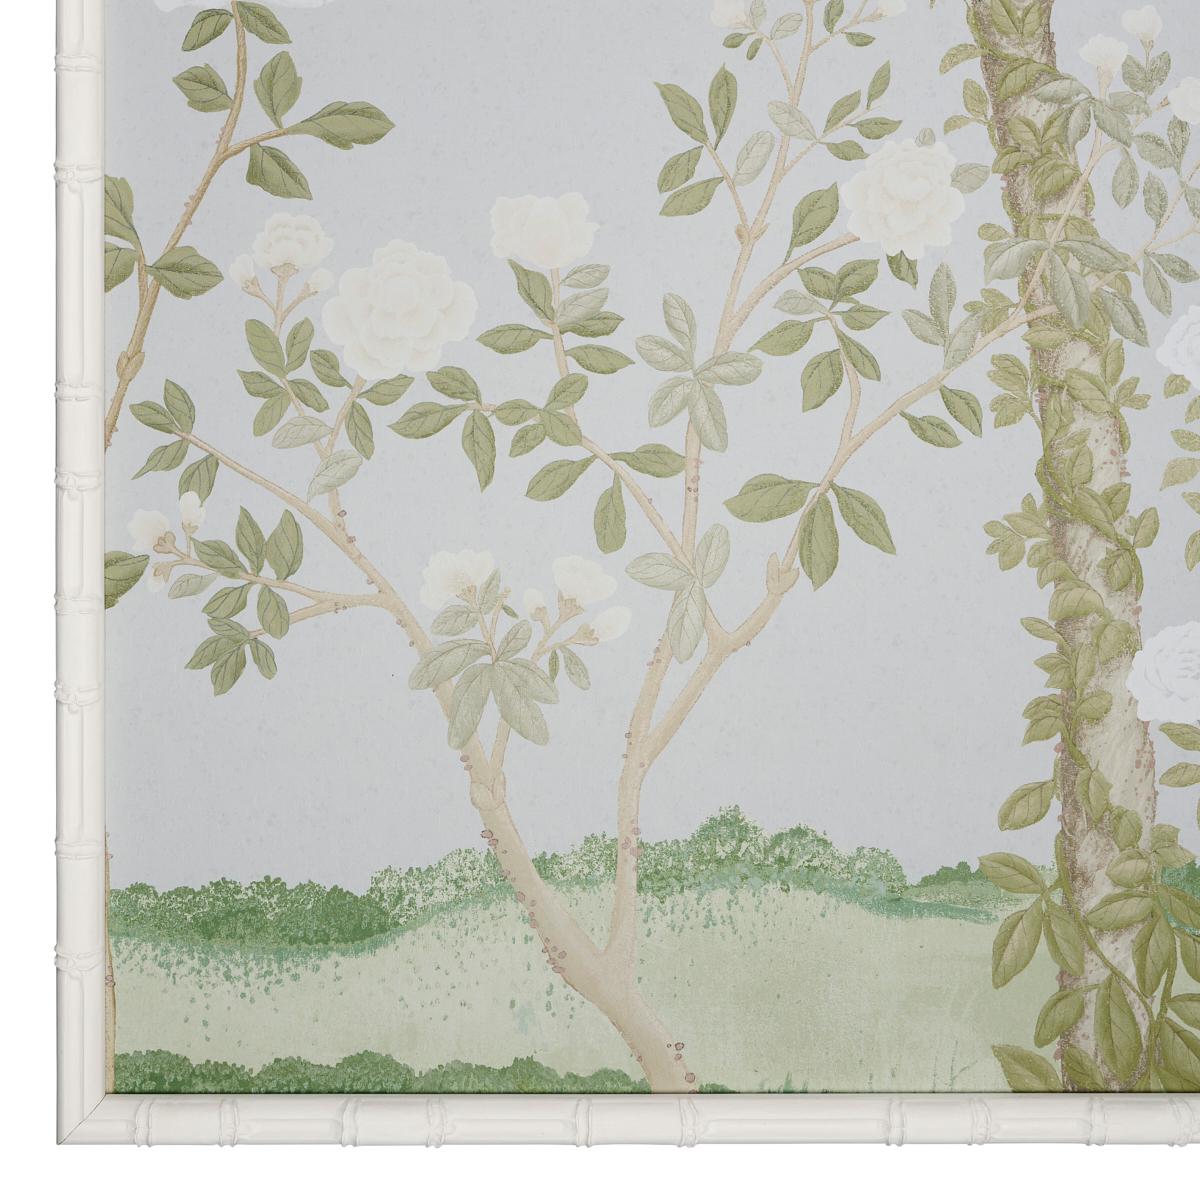 Our wallpaper panels are gorgeous enough to frame—and we’ve done all the work for you. Resized to capture the most alluring portions of the original design by Miles Redd, this art panel pairs the formality of an English garden with the soft romance